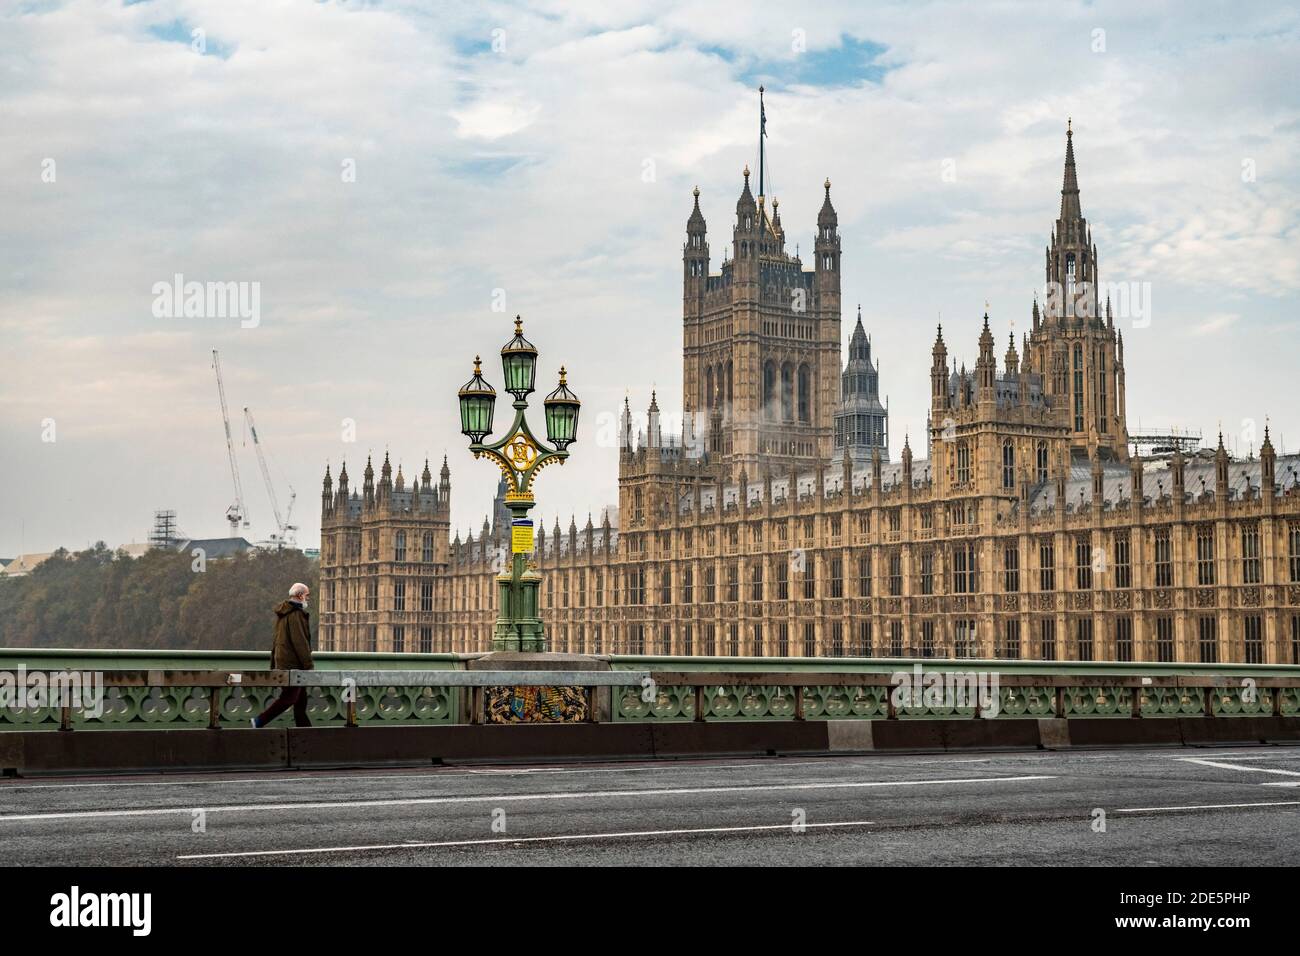 London in Coronavirus Covid-19 lockdown, quiet with empty roads and streets with almost no people, just one person commuting, with Houses of Parliament in England, UK at rush hour Stock Photo